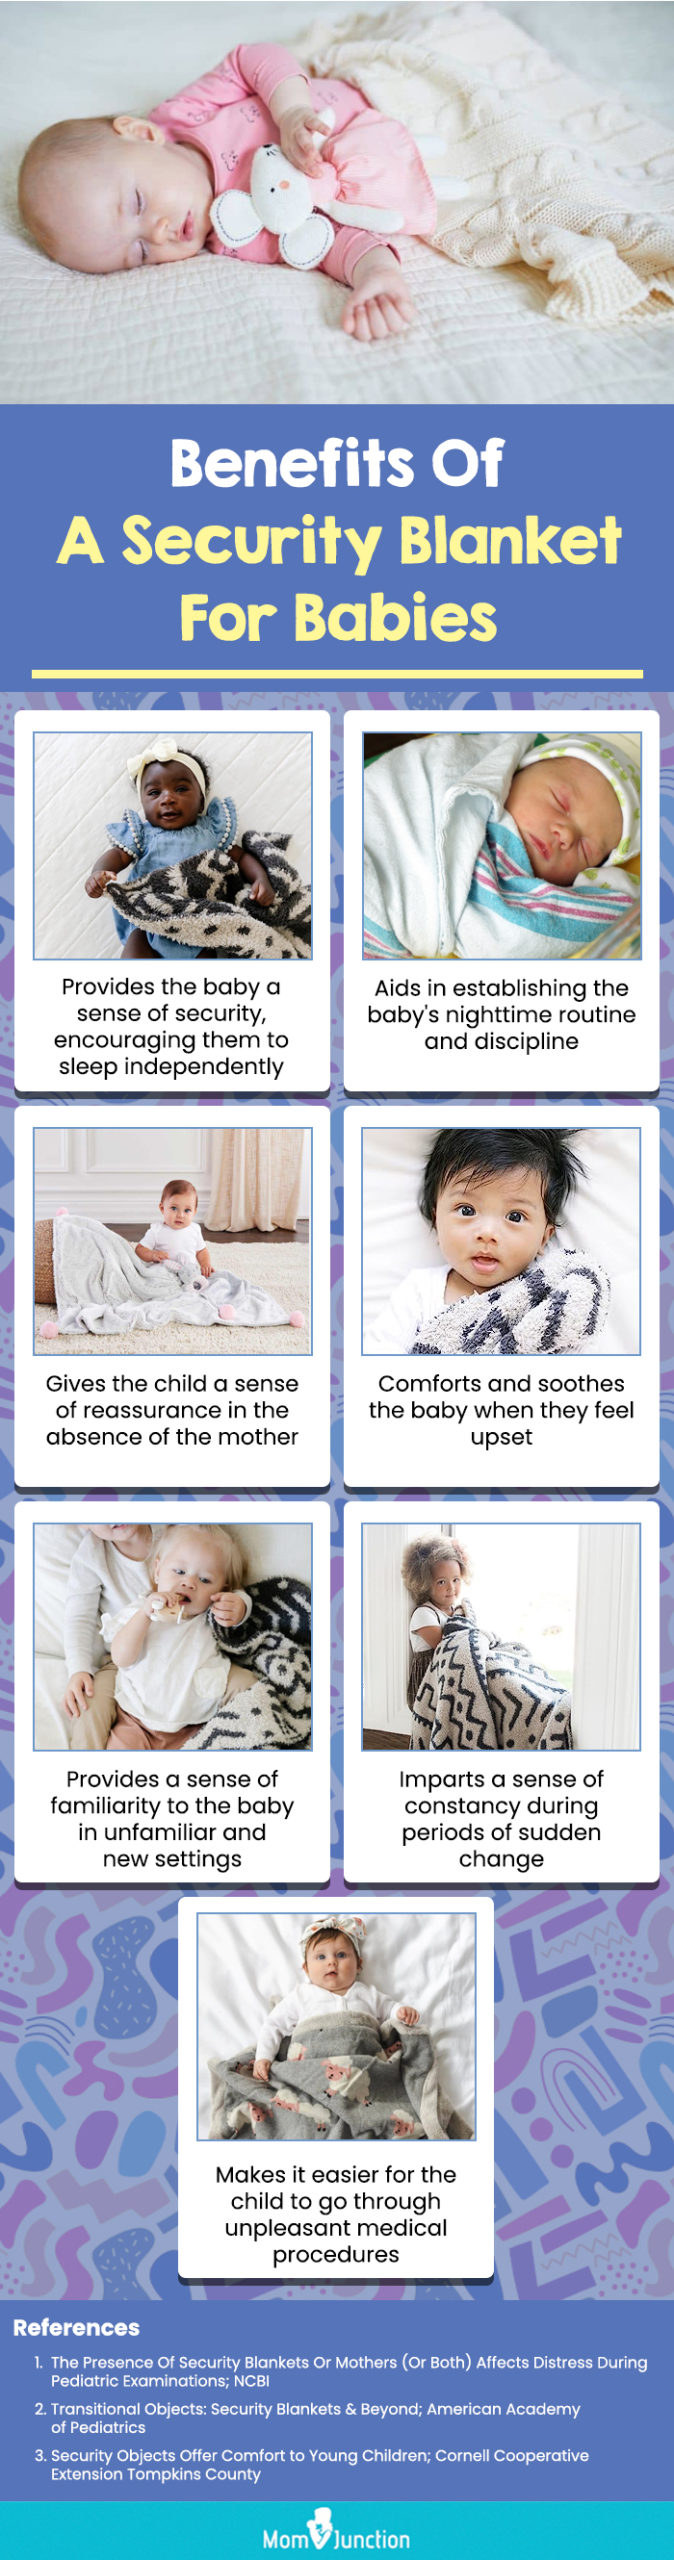 Benefits Of A Security Blanket For Babies(infographic)